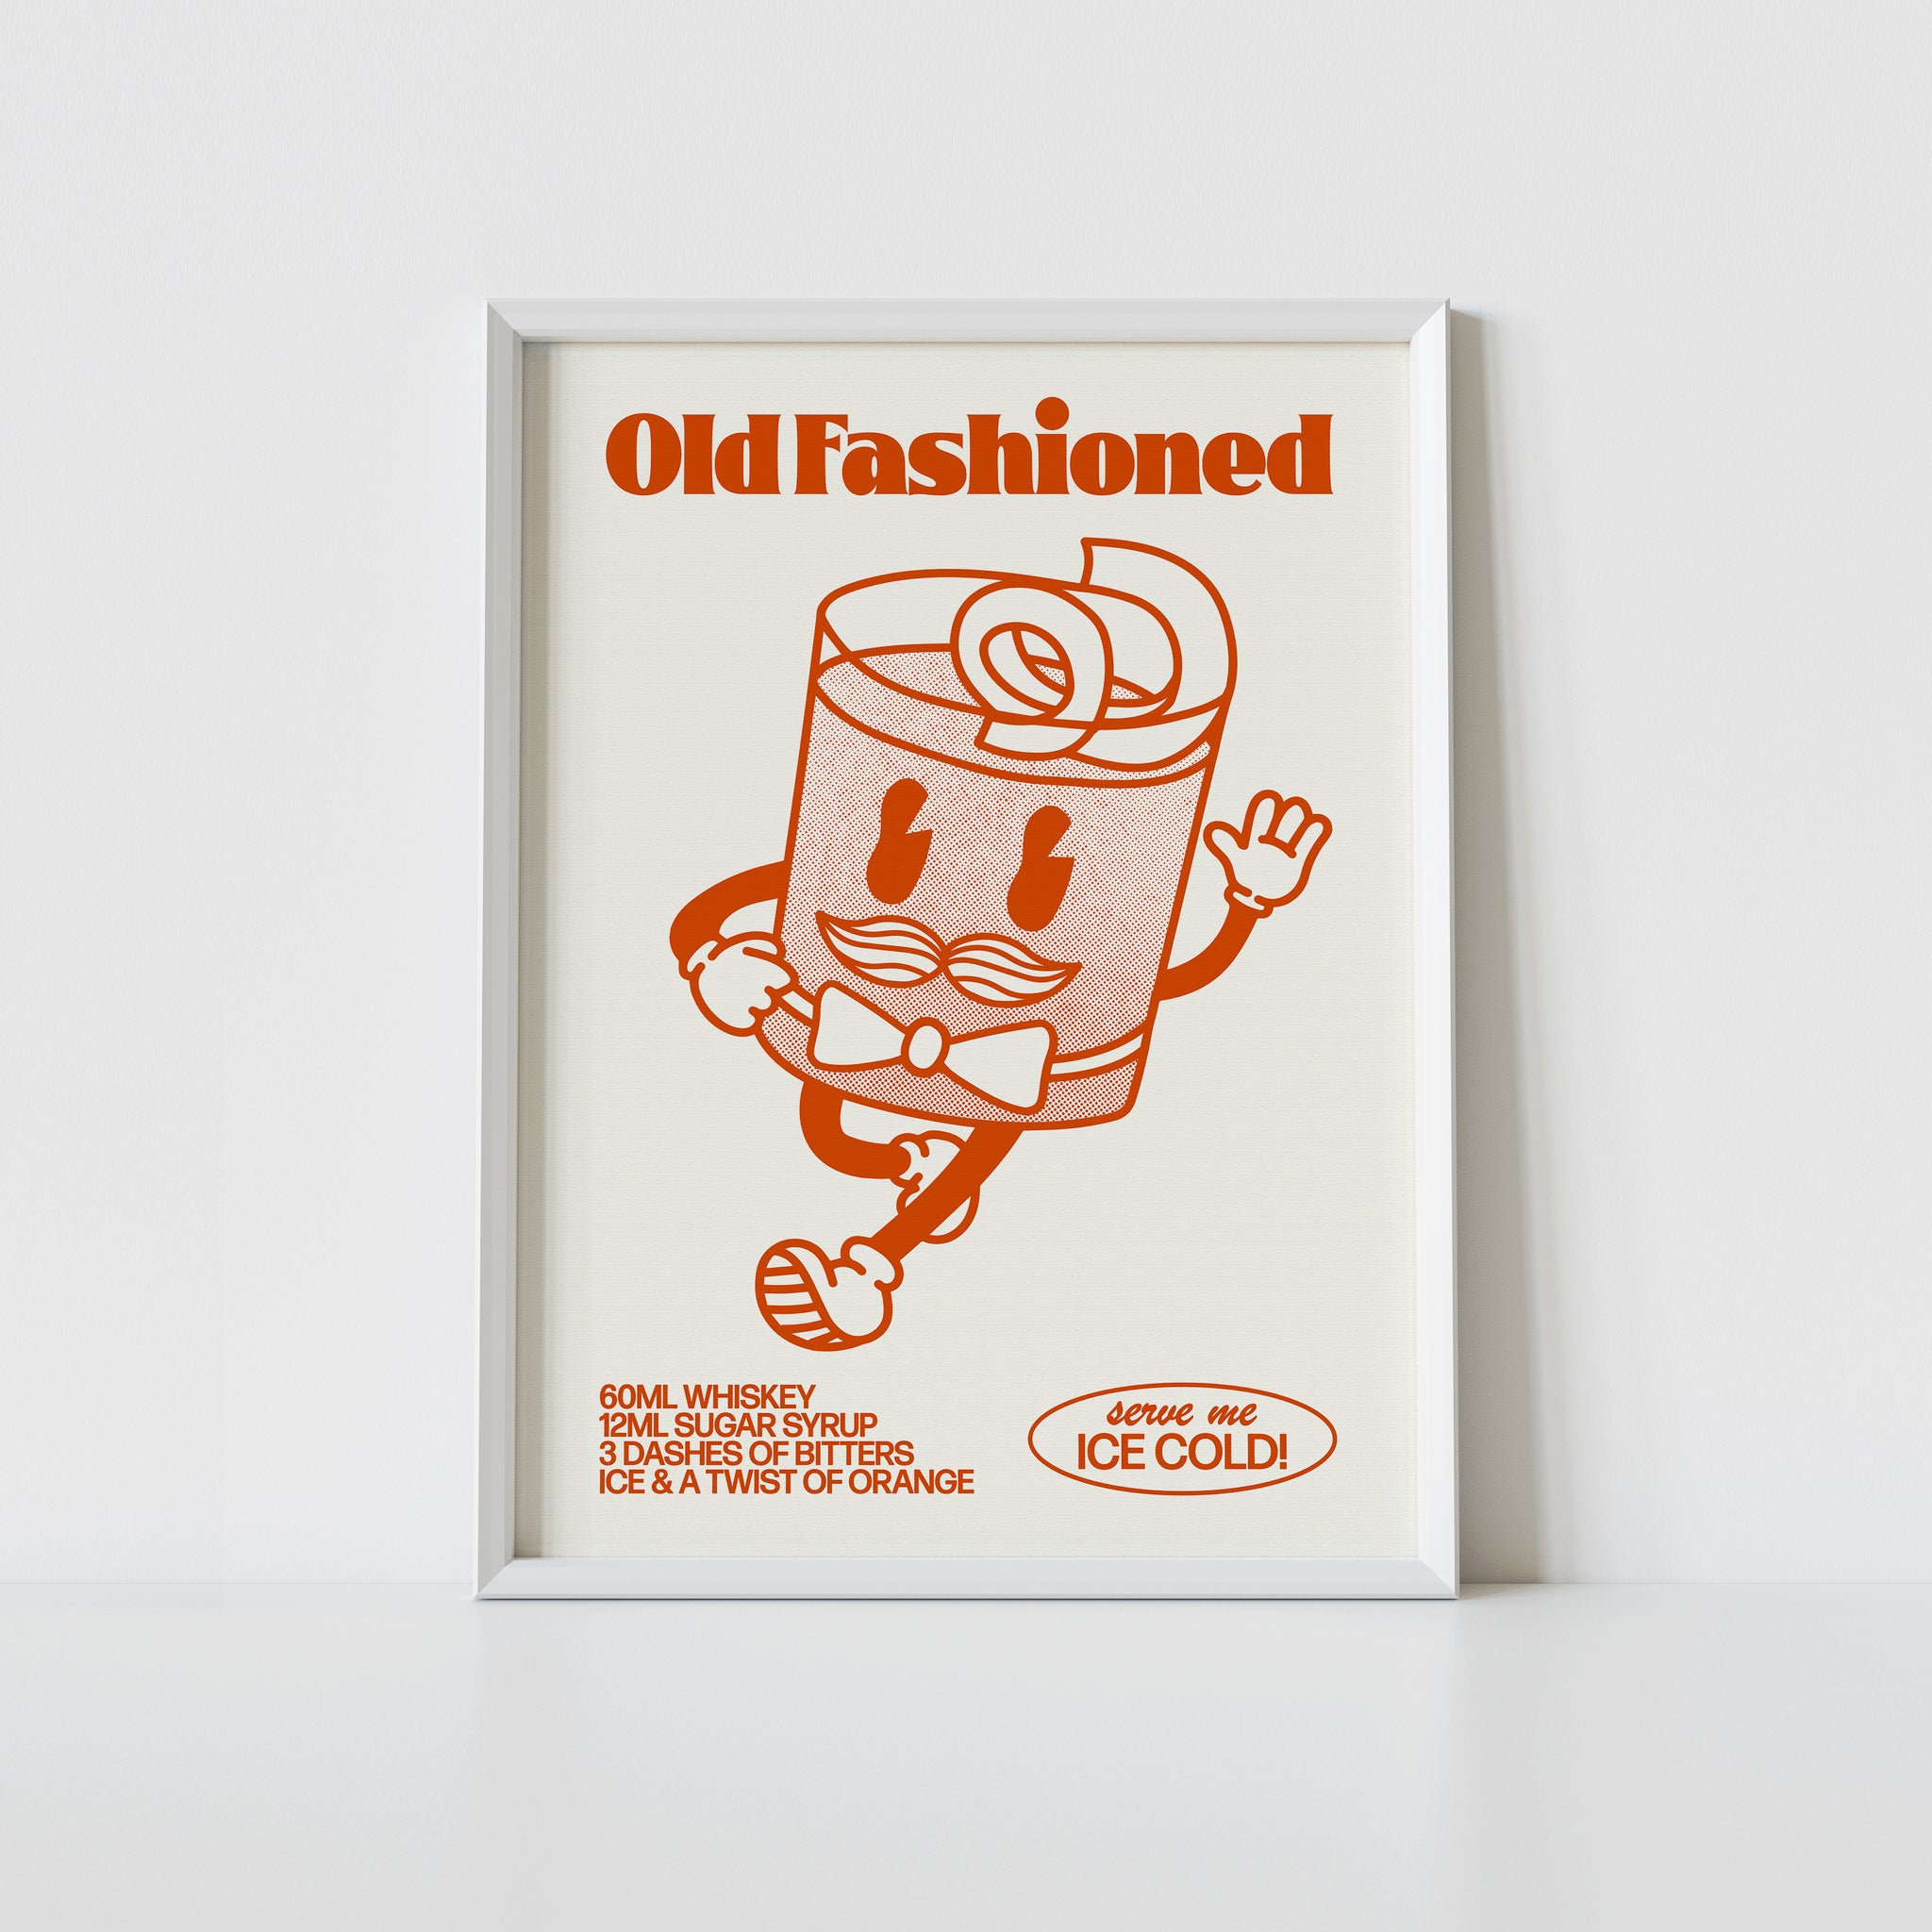 'Old Fashioned' print